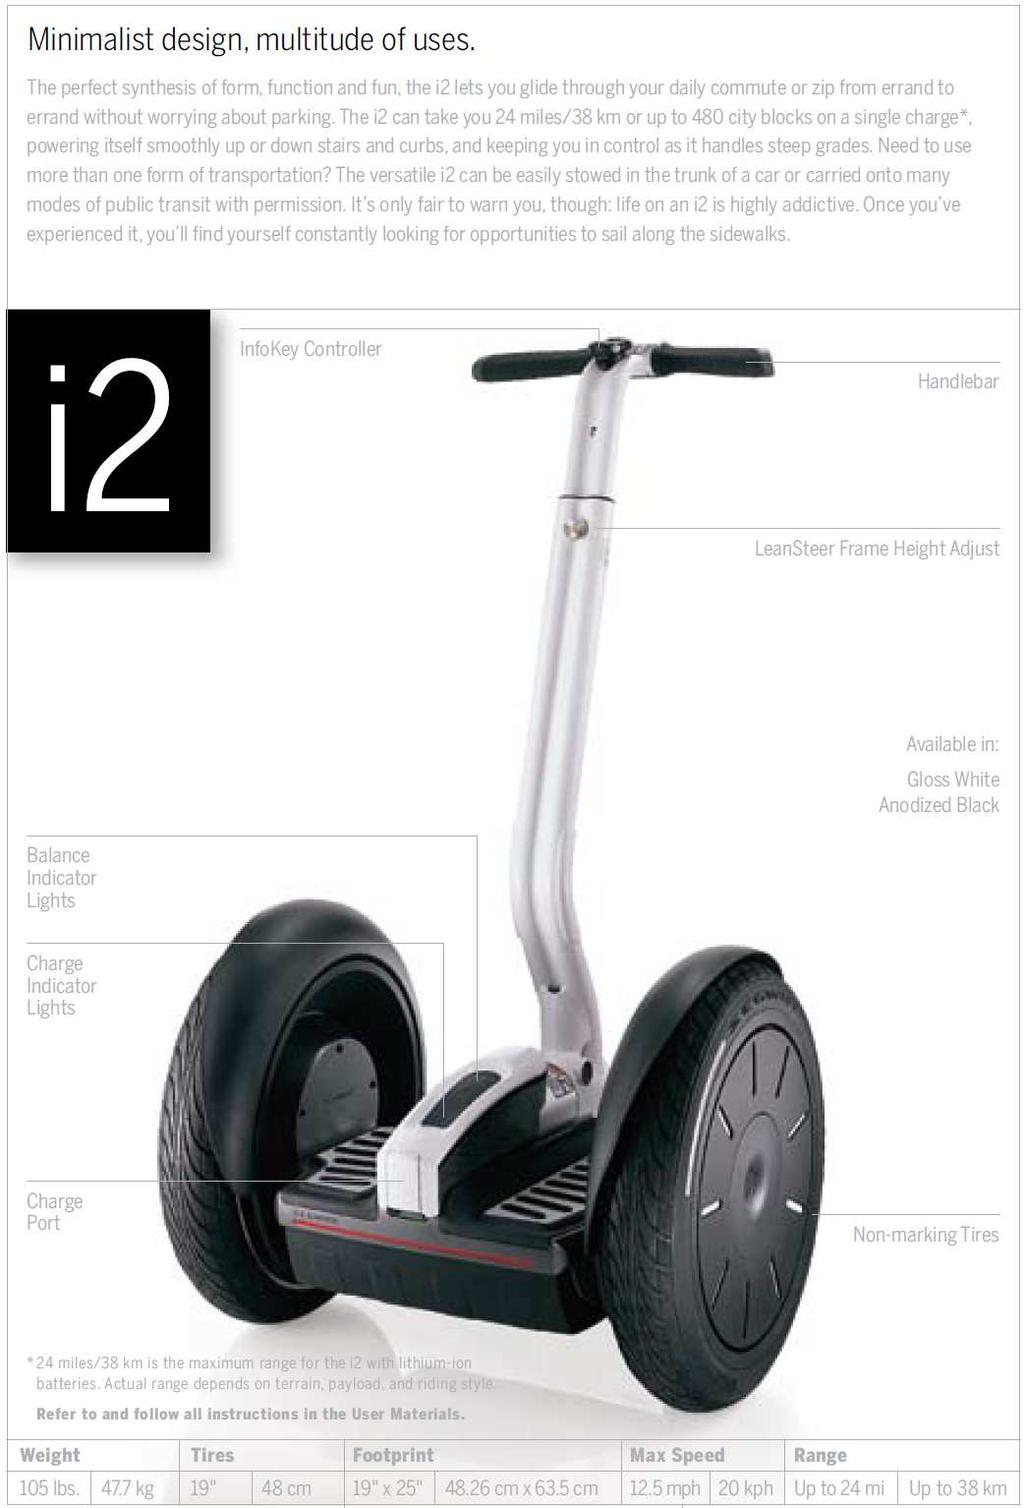 1 Introduction This White Paper calculates the g/km equivalent carbon footprint figure for the Segway i2 personal transporter, recharged from a typical UK mains power supply. A figure of 24.